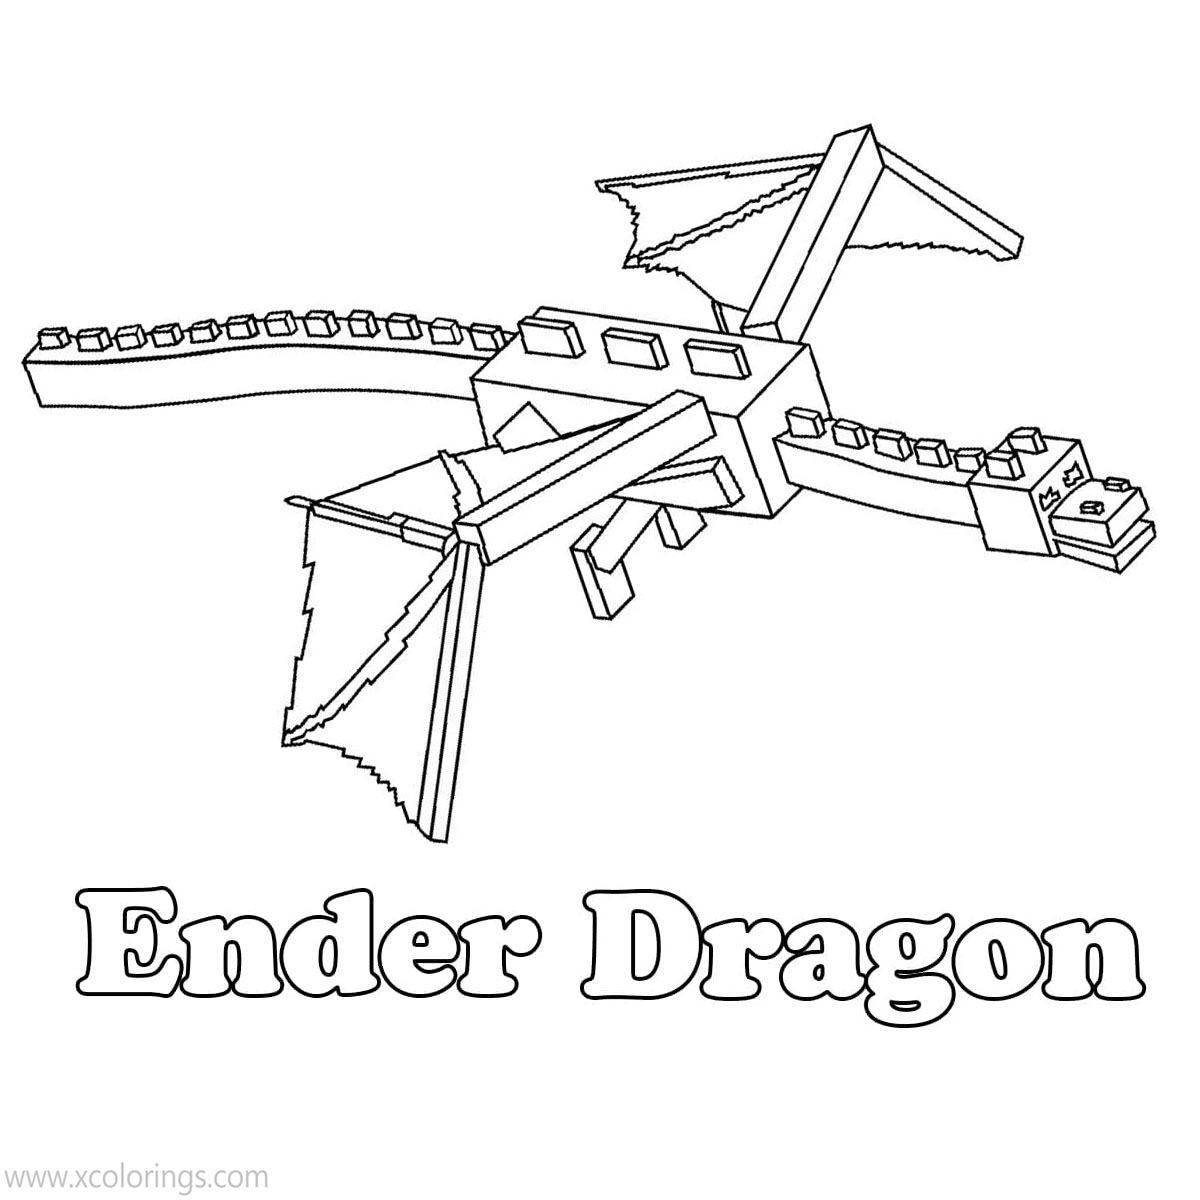 Gorgeous minecraft ender dragon coloring book